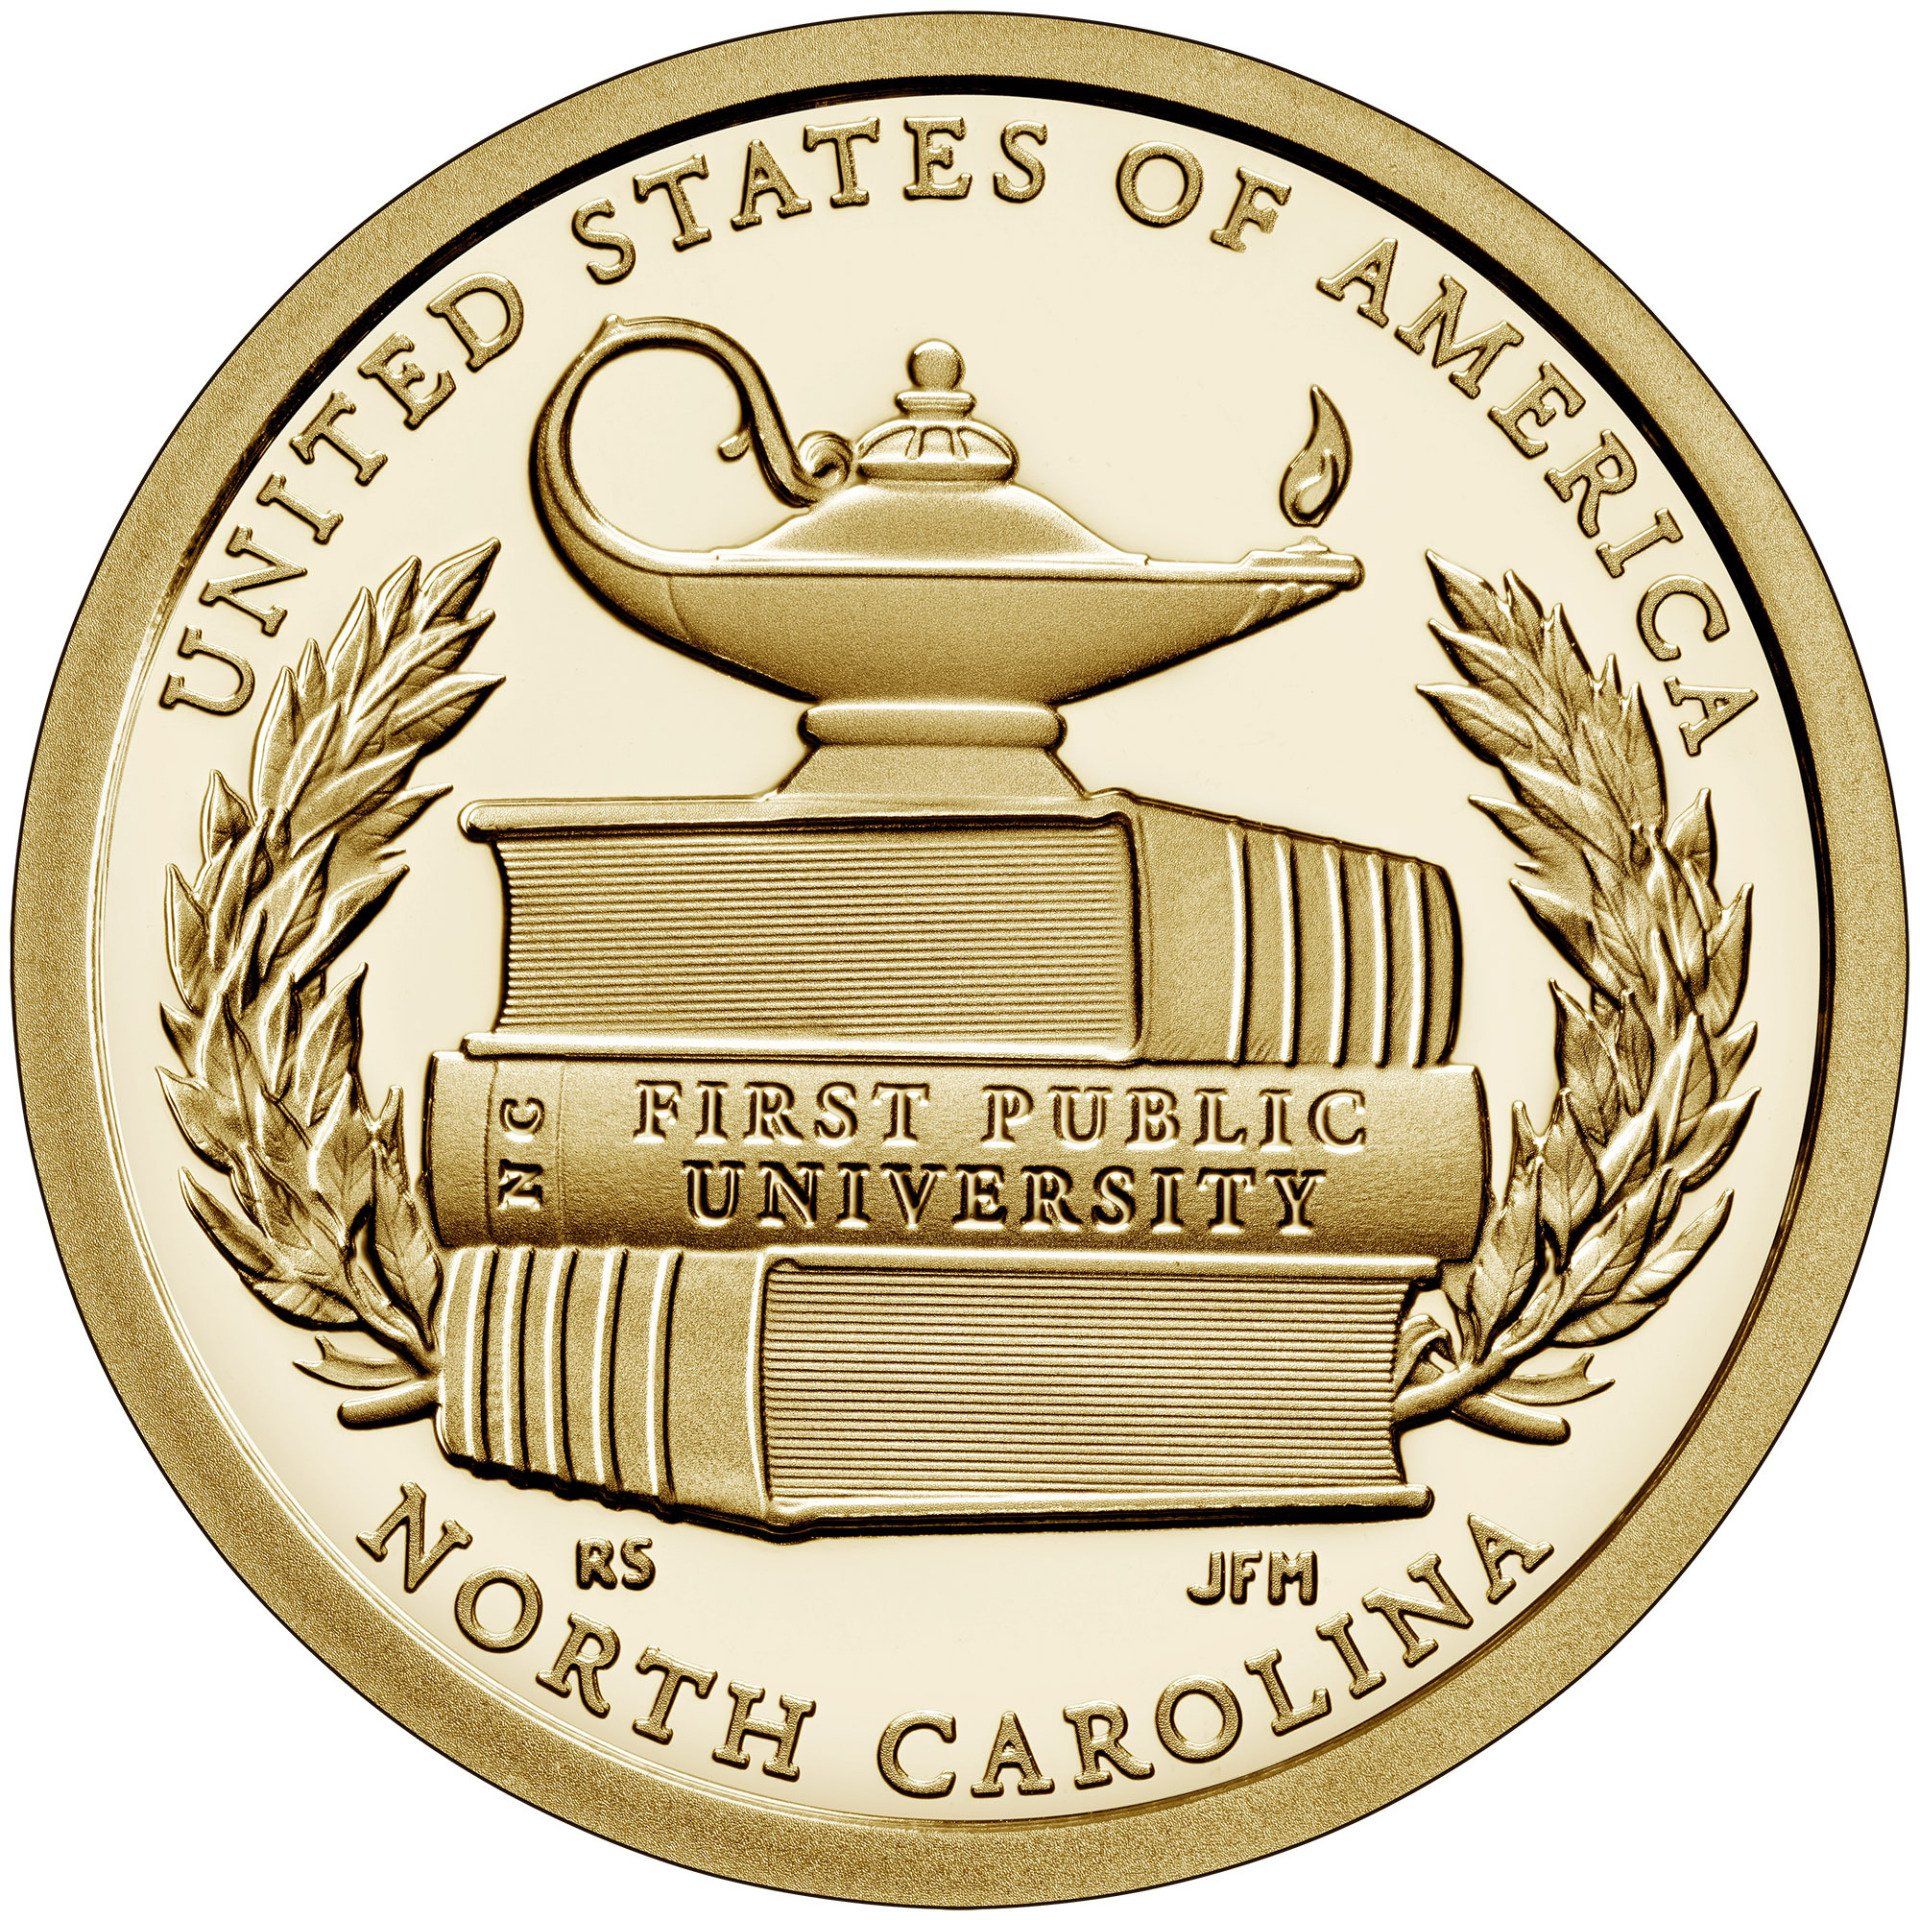 Reverse of the 2021 North Carolina American Innovation $1 Coin shows a stack of three textbooks with “FIRST PUBLIC UNIVERSITY” on the spine of the middle book. A lamp of knowledge is perched atop the books and olive branches curve around the edge of the design.  United States Mint Image